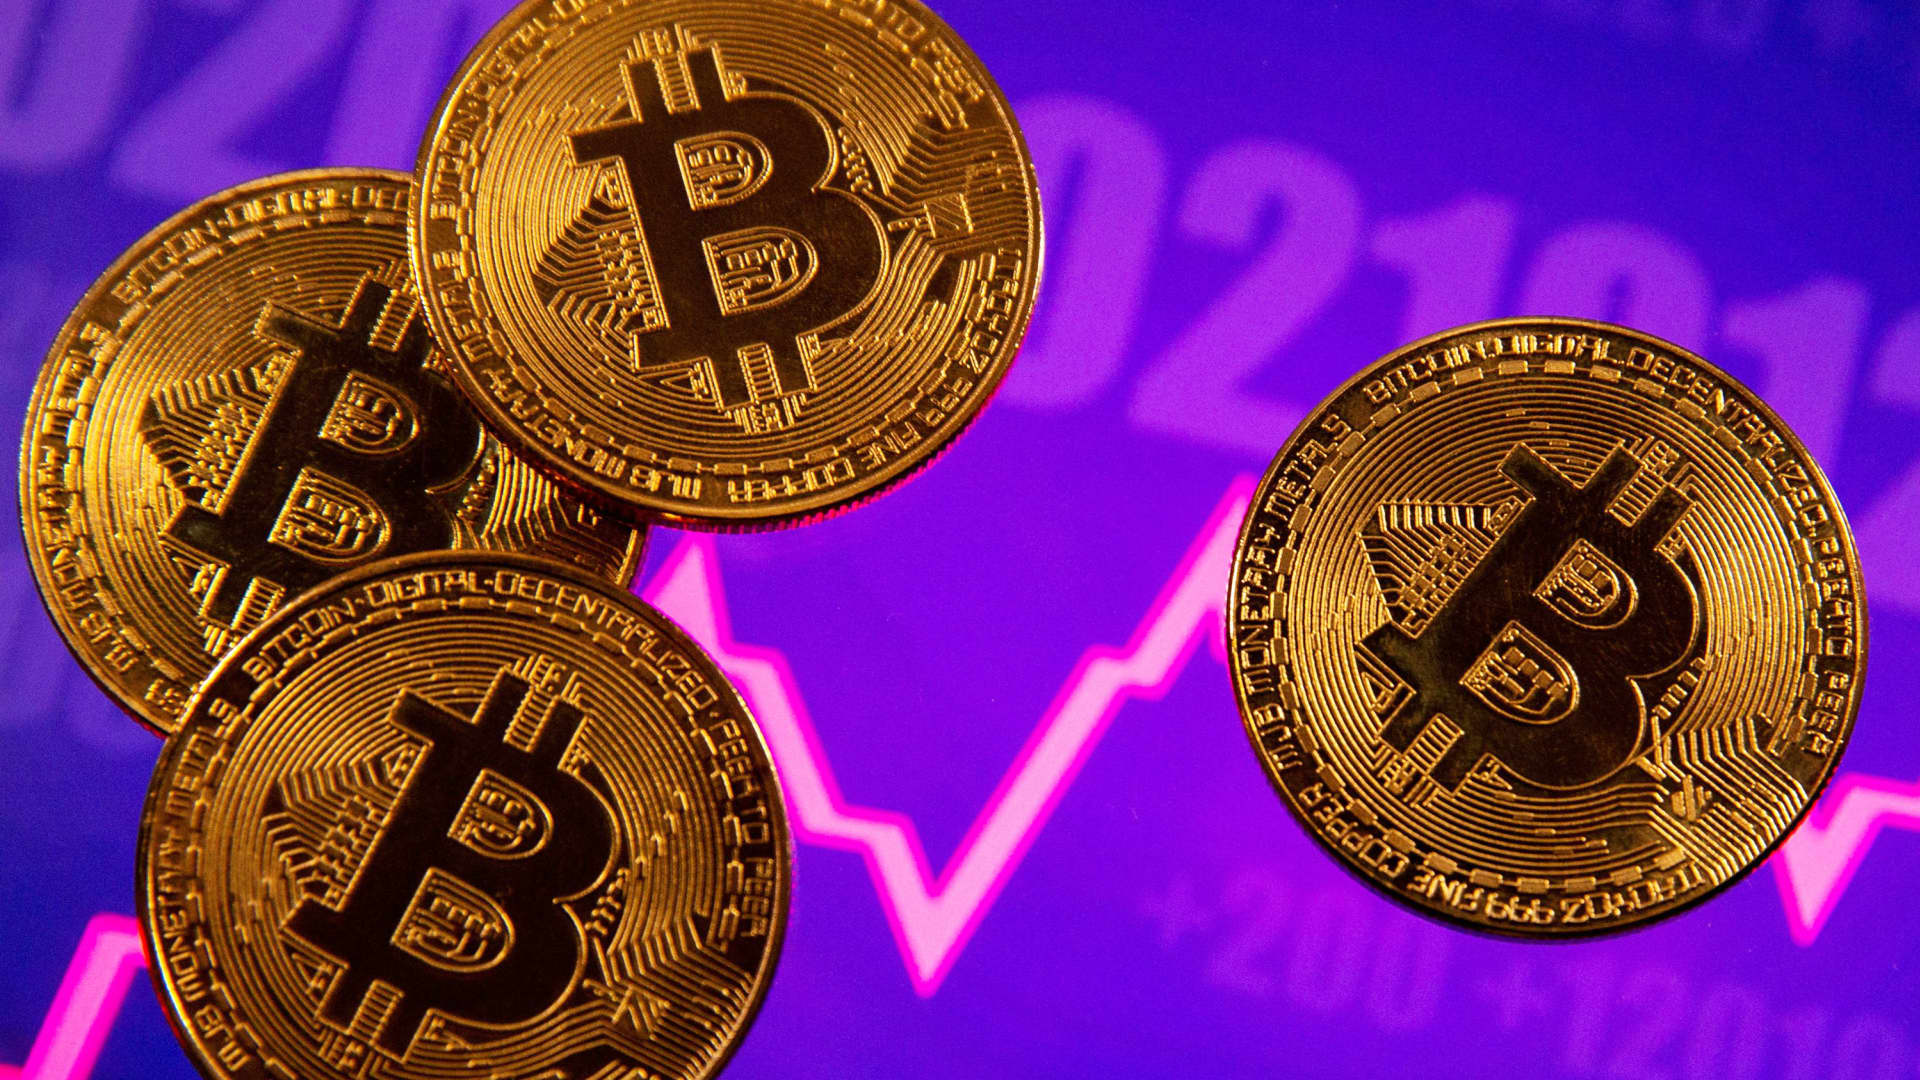 A representation of virtual currency Bitcoin is seen in front of a stock graph in this illustration.